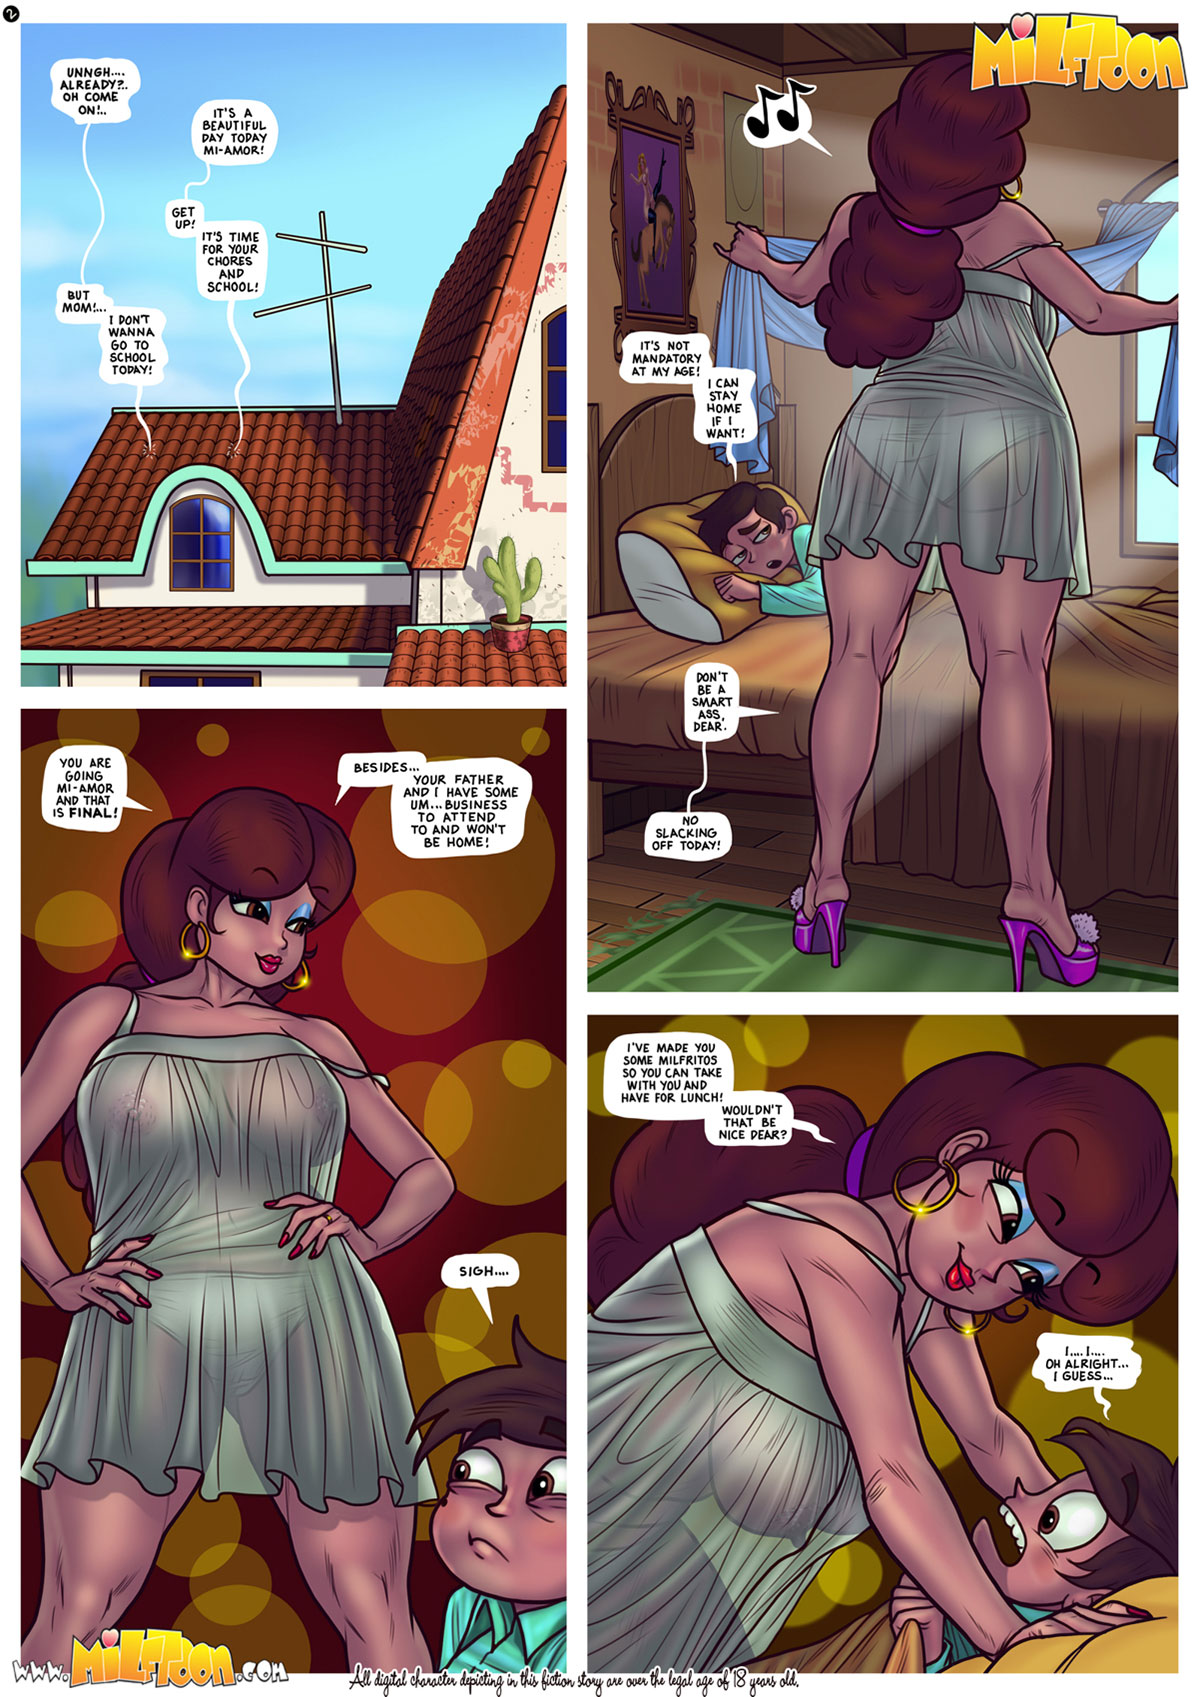 Milftoon comic "Marco vs The Forces of Milf" - page 2